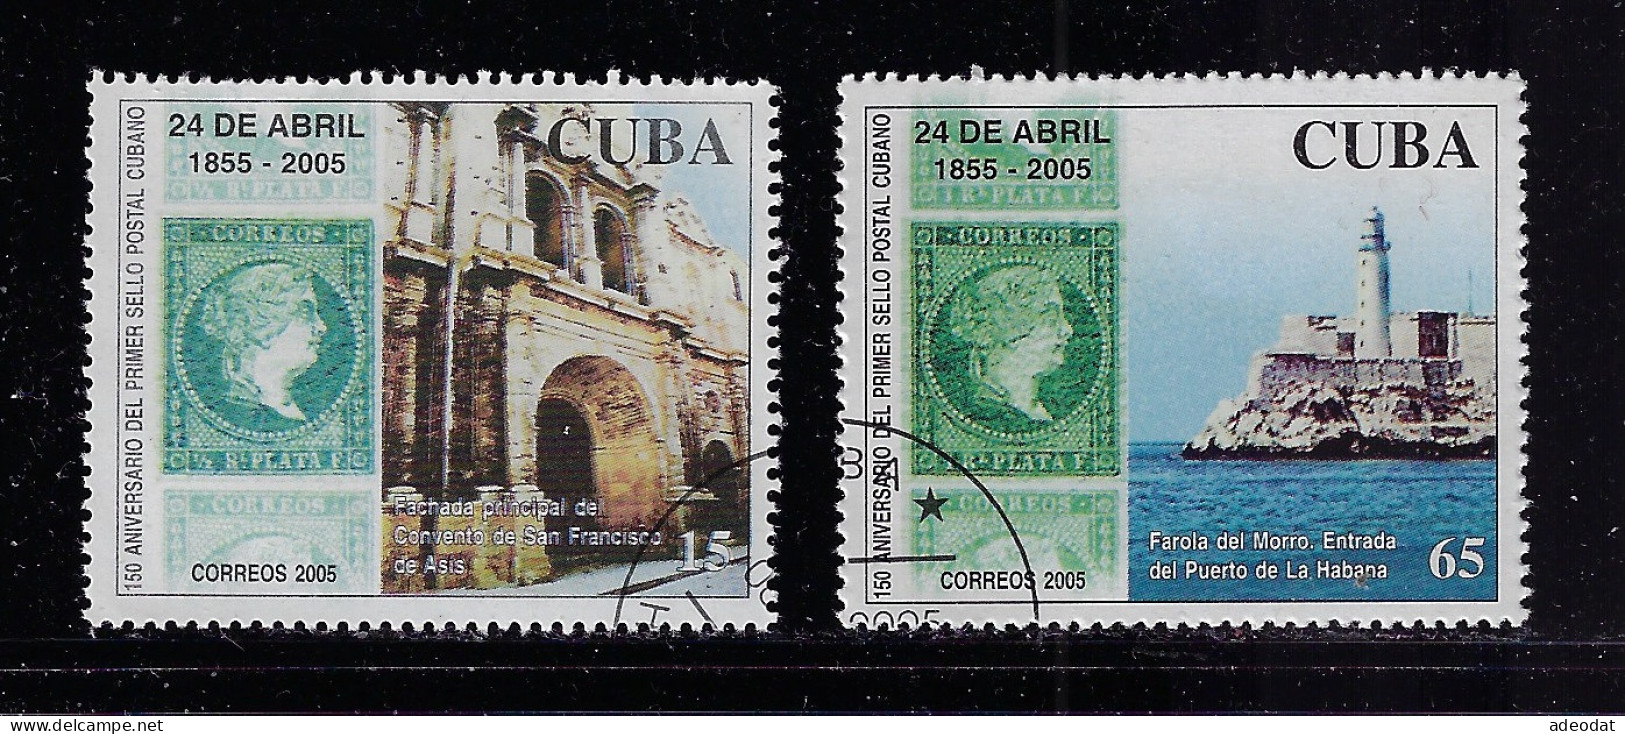 CUBA 2005 SCOTT 4490-4491 CANCELLED - Used Stamps